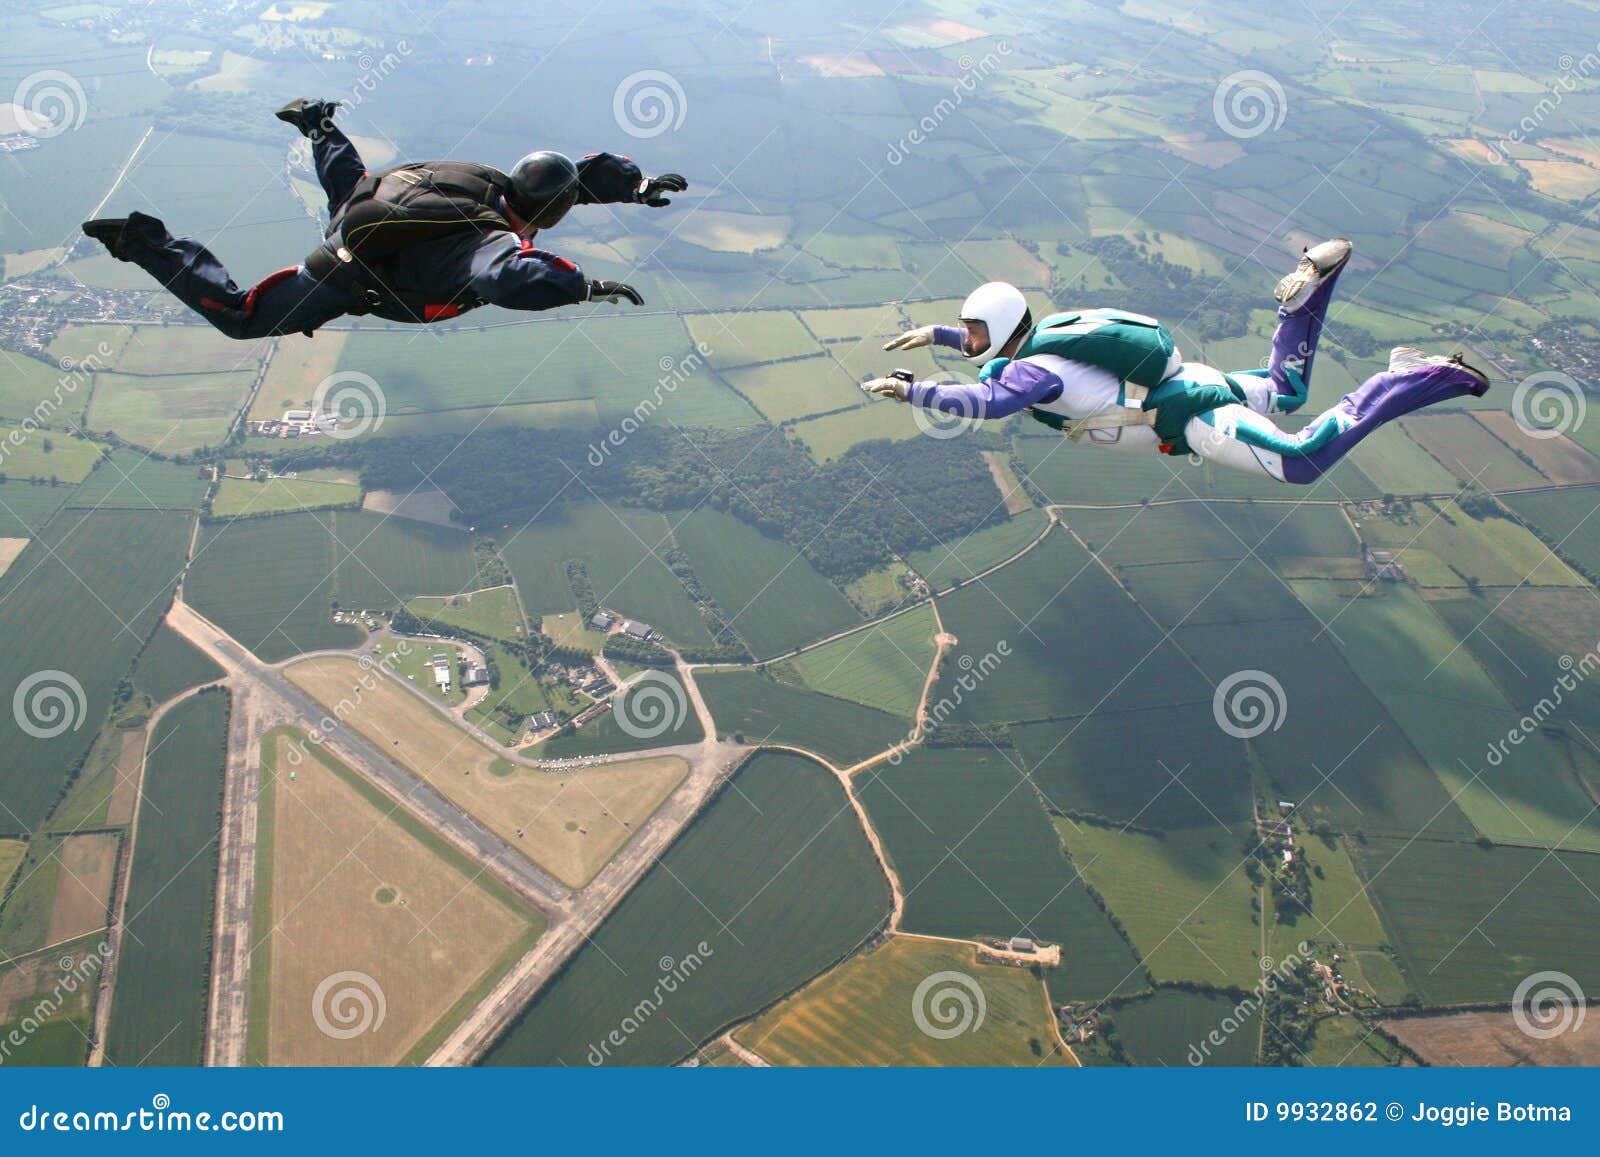 two skydivers in freefall